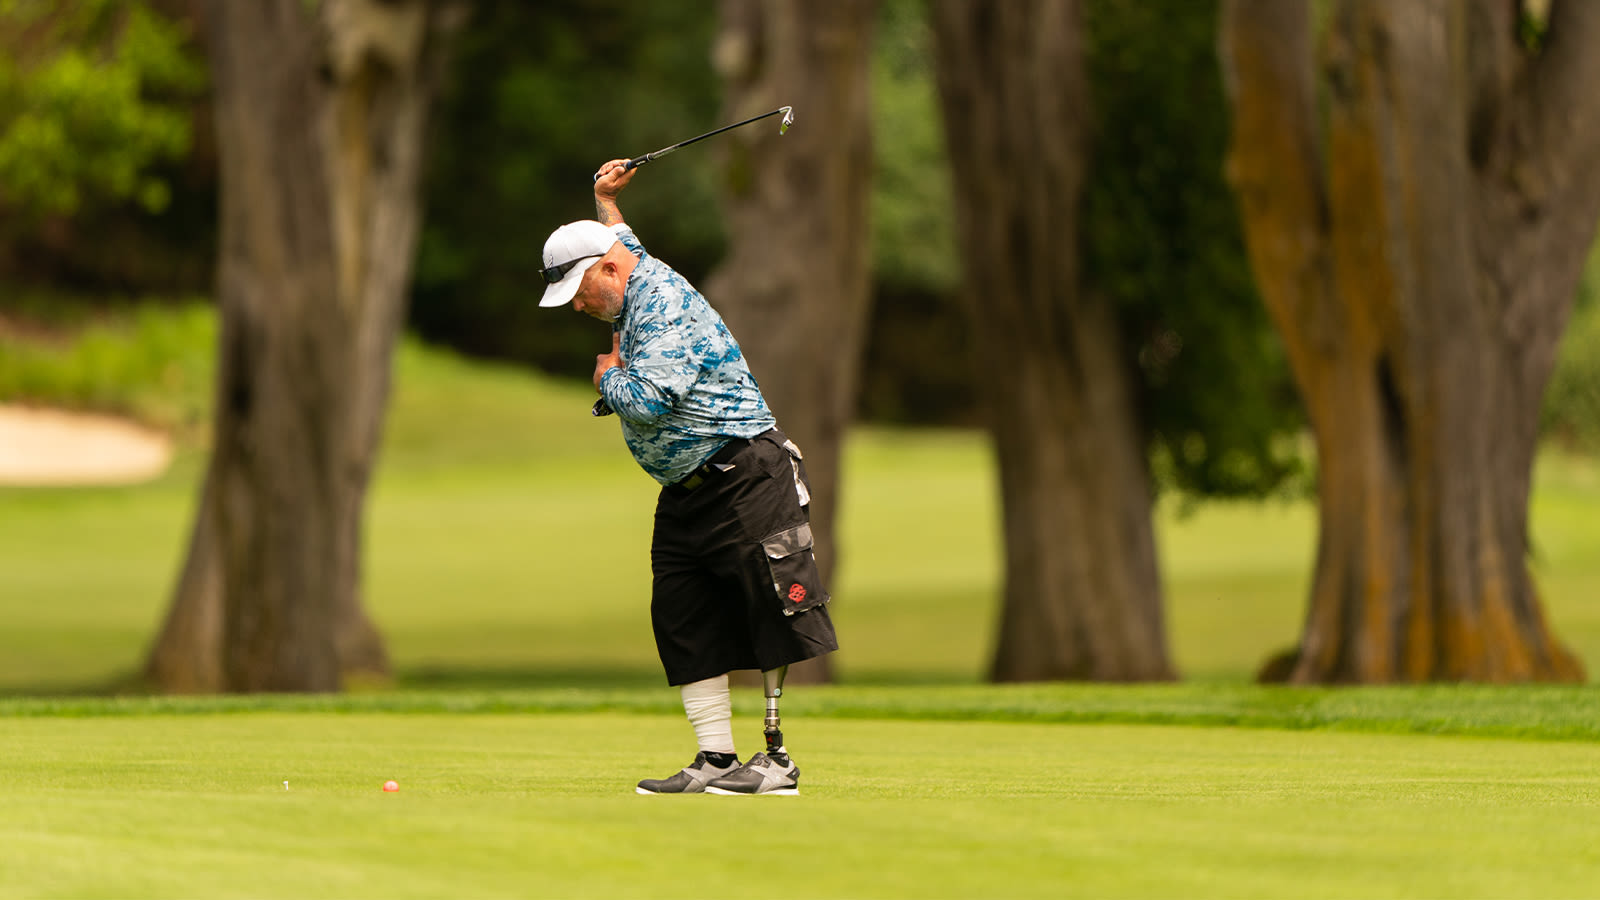 A PGA Hope Veteran hits his shot at the North California HOPE Golf Outing during the 102nd PGA Championship at the Olympic Club on August 3, 2020 in San Francisco, California. (Photo by Darren Carroll/PGA of America)